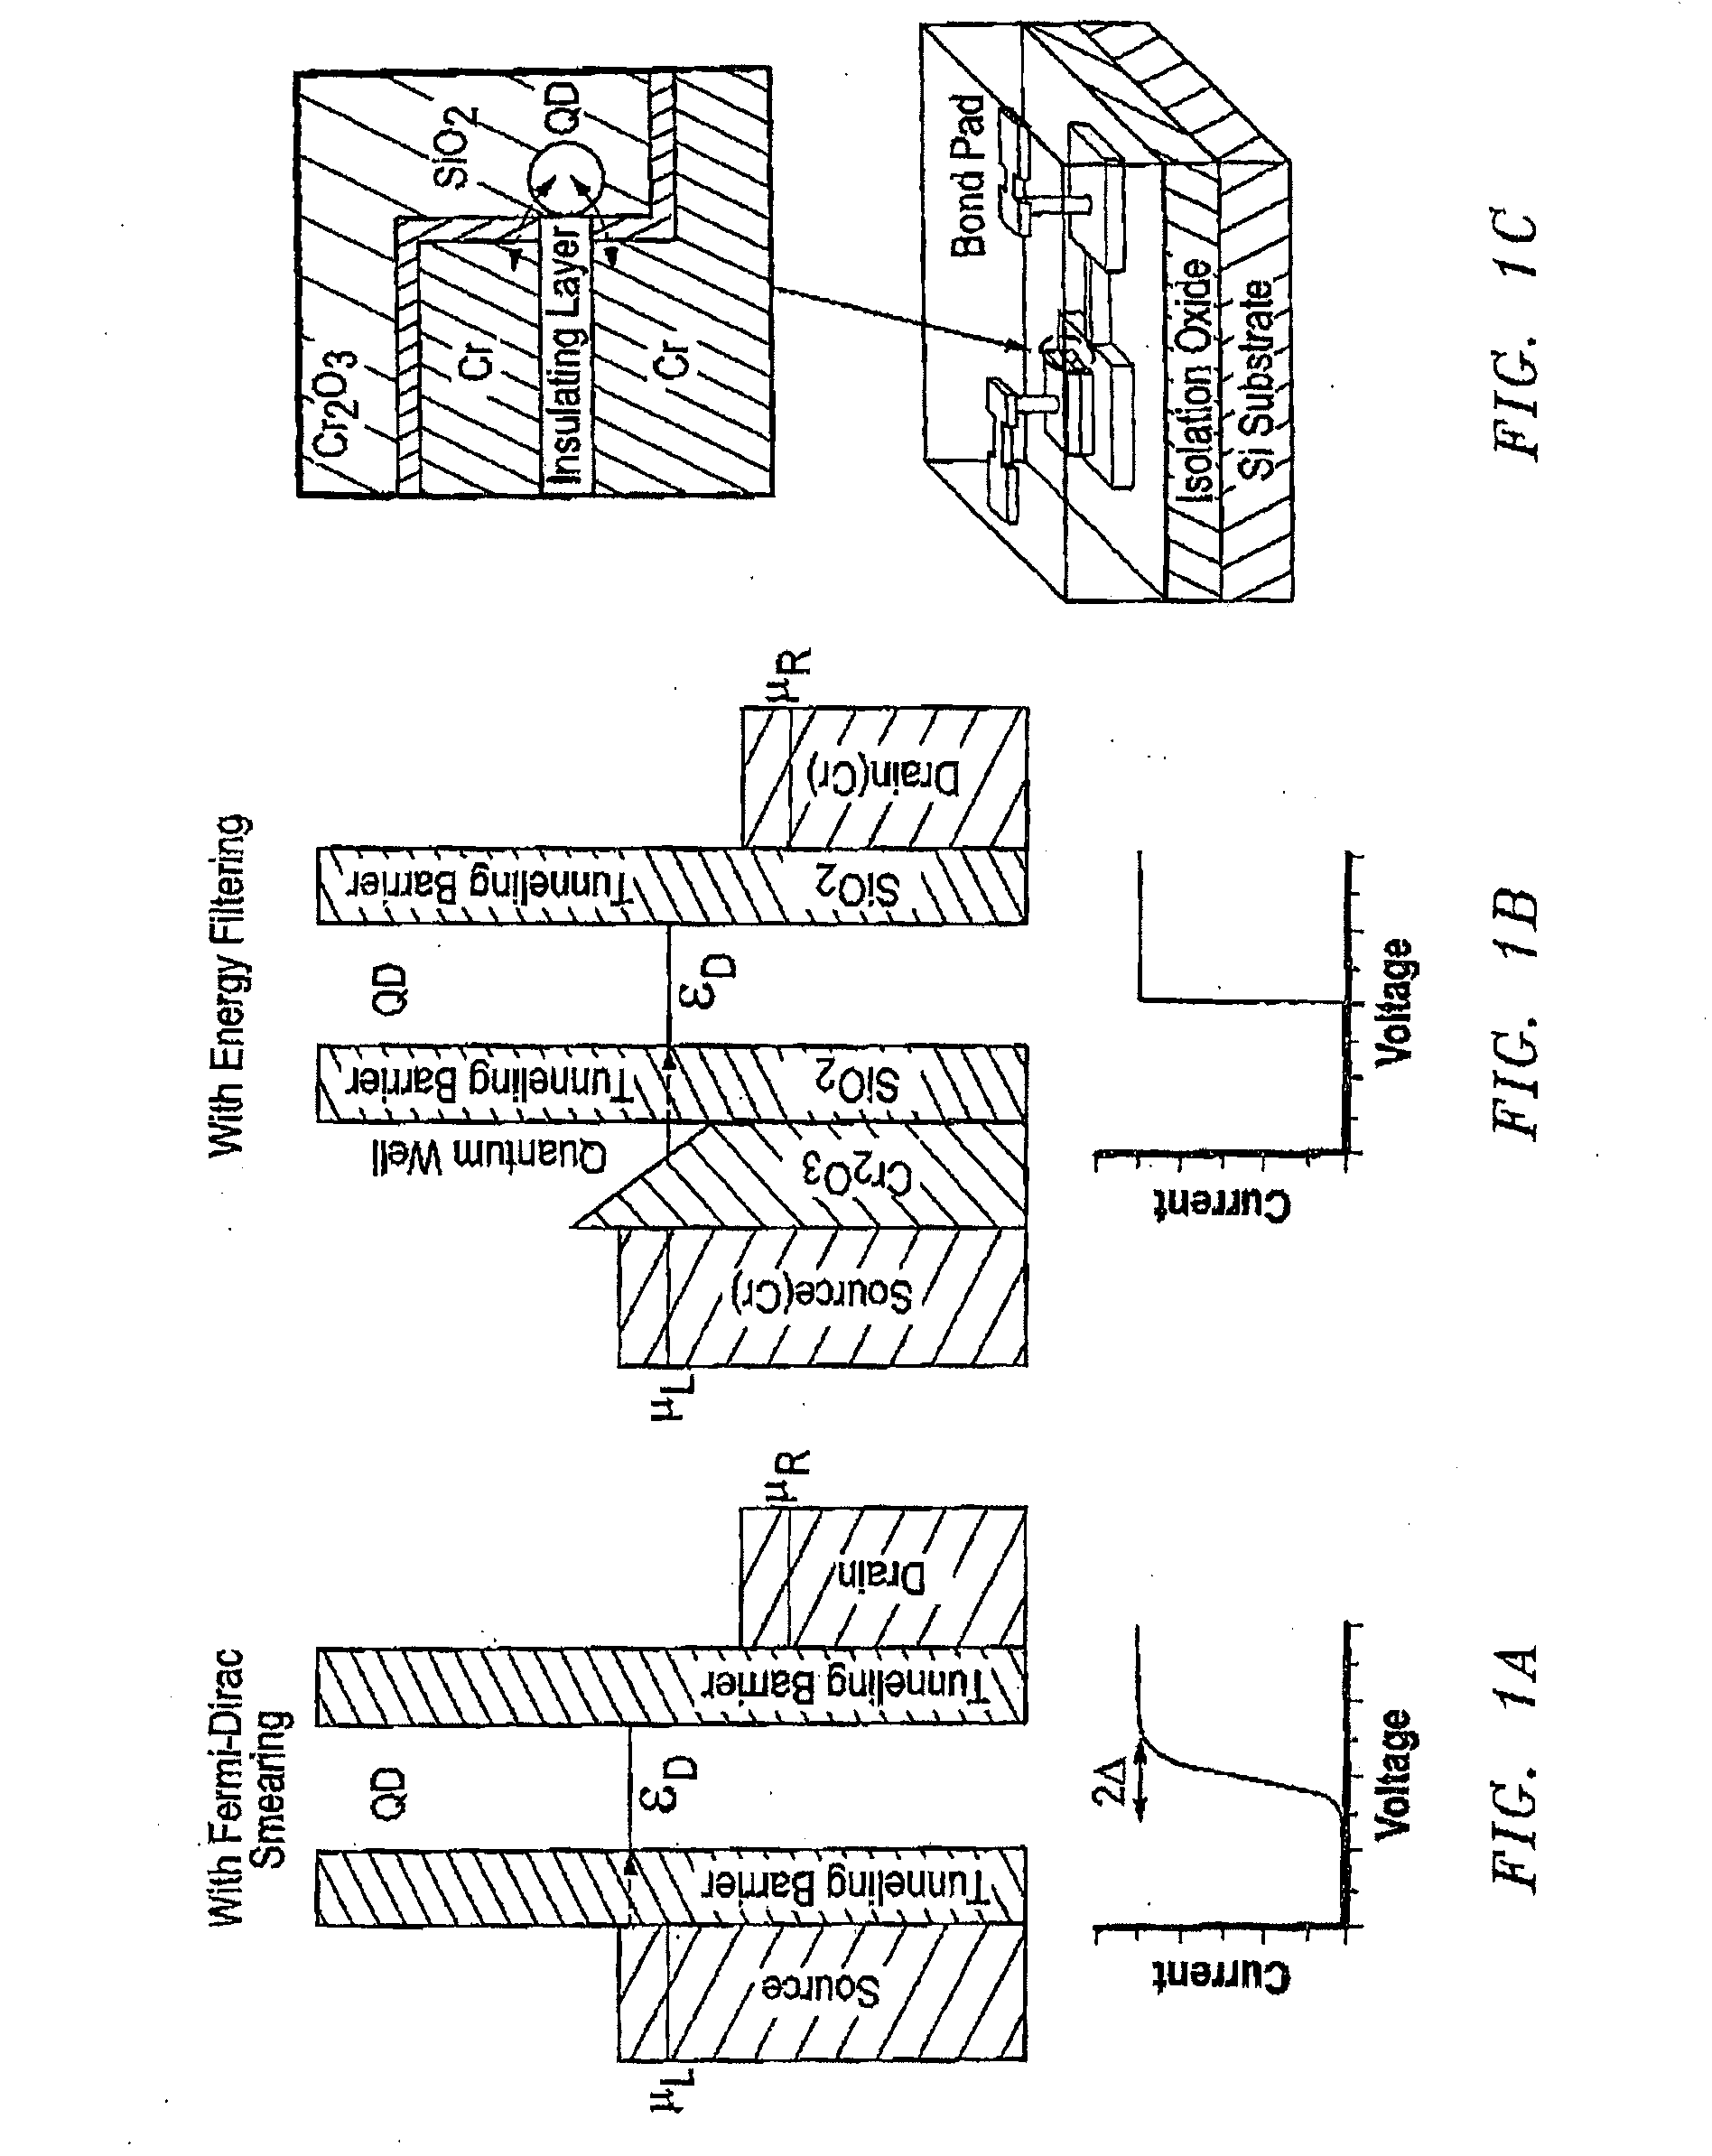 Energy-filtered cold electron devices and methods